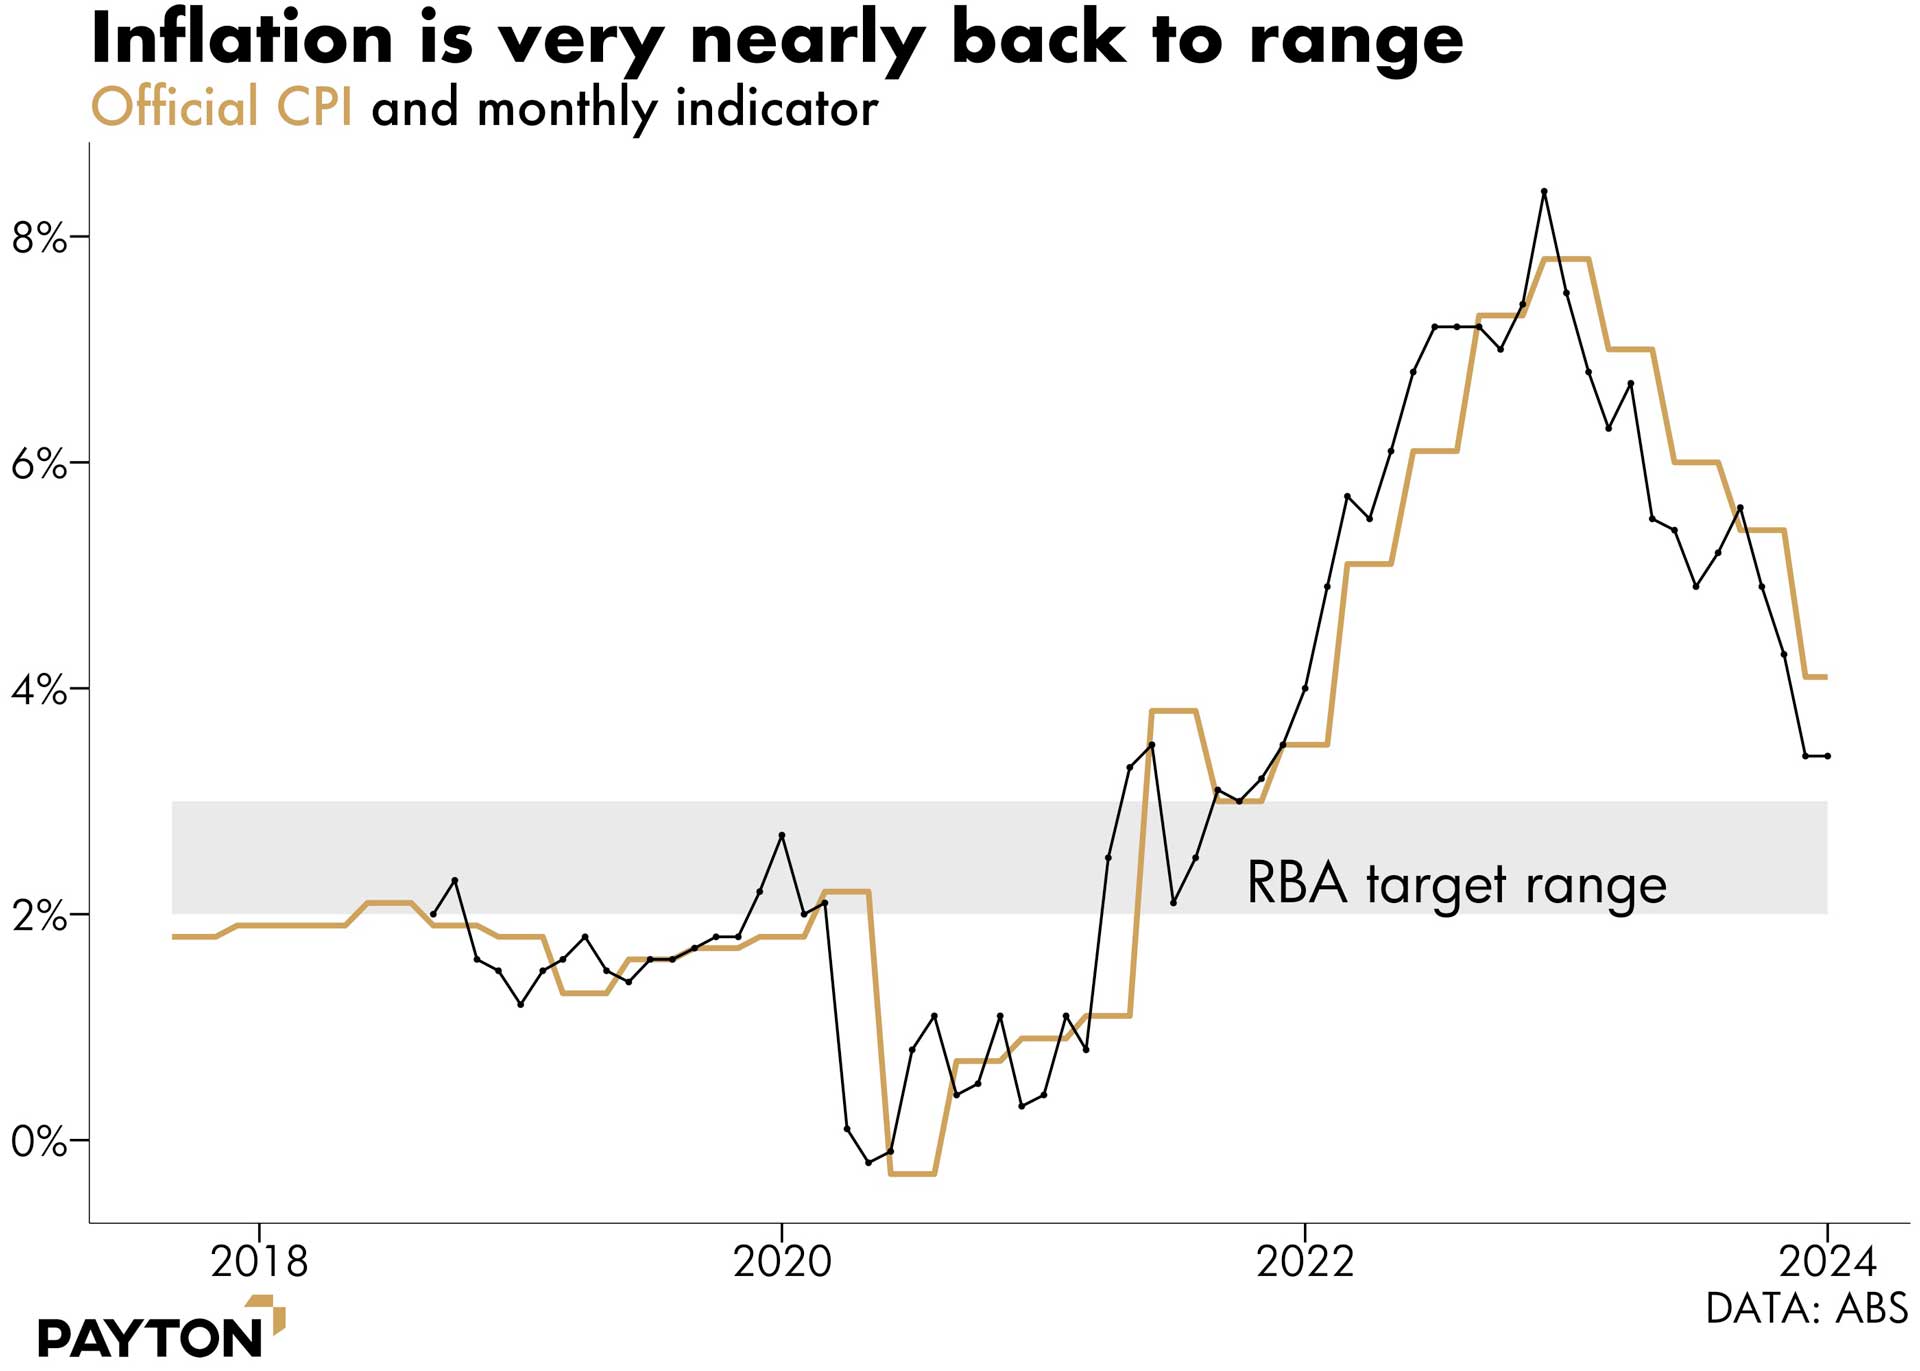 Inflation very nearly back to range